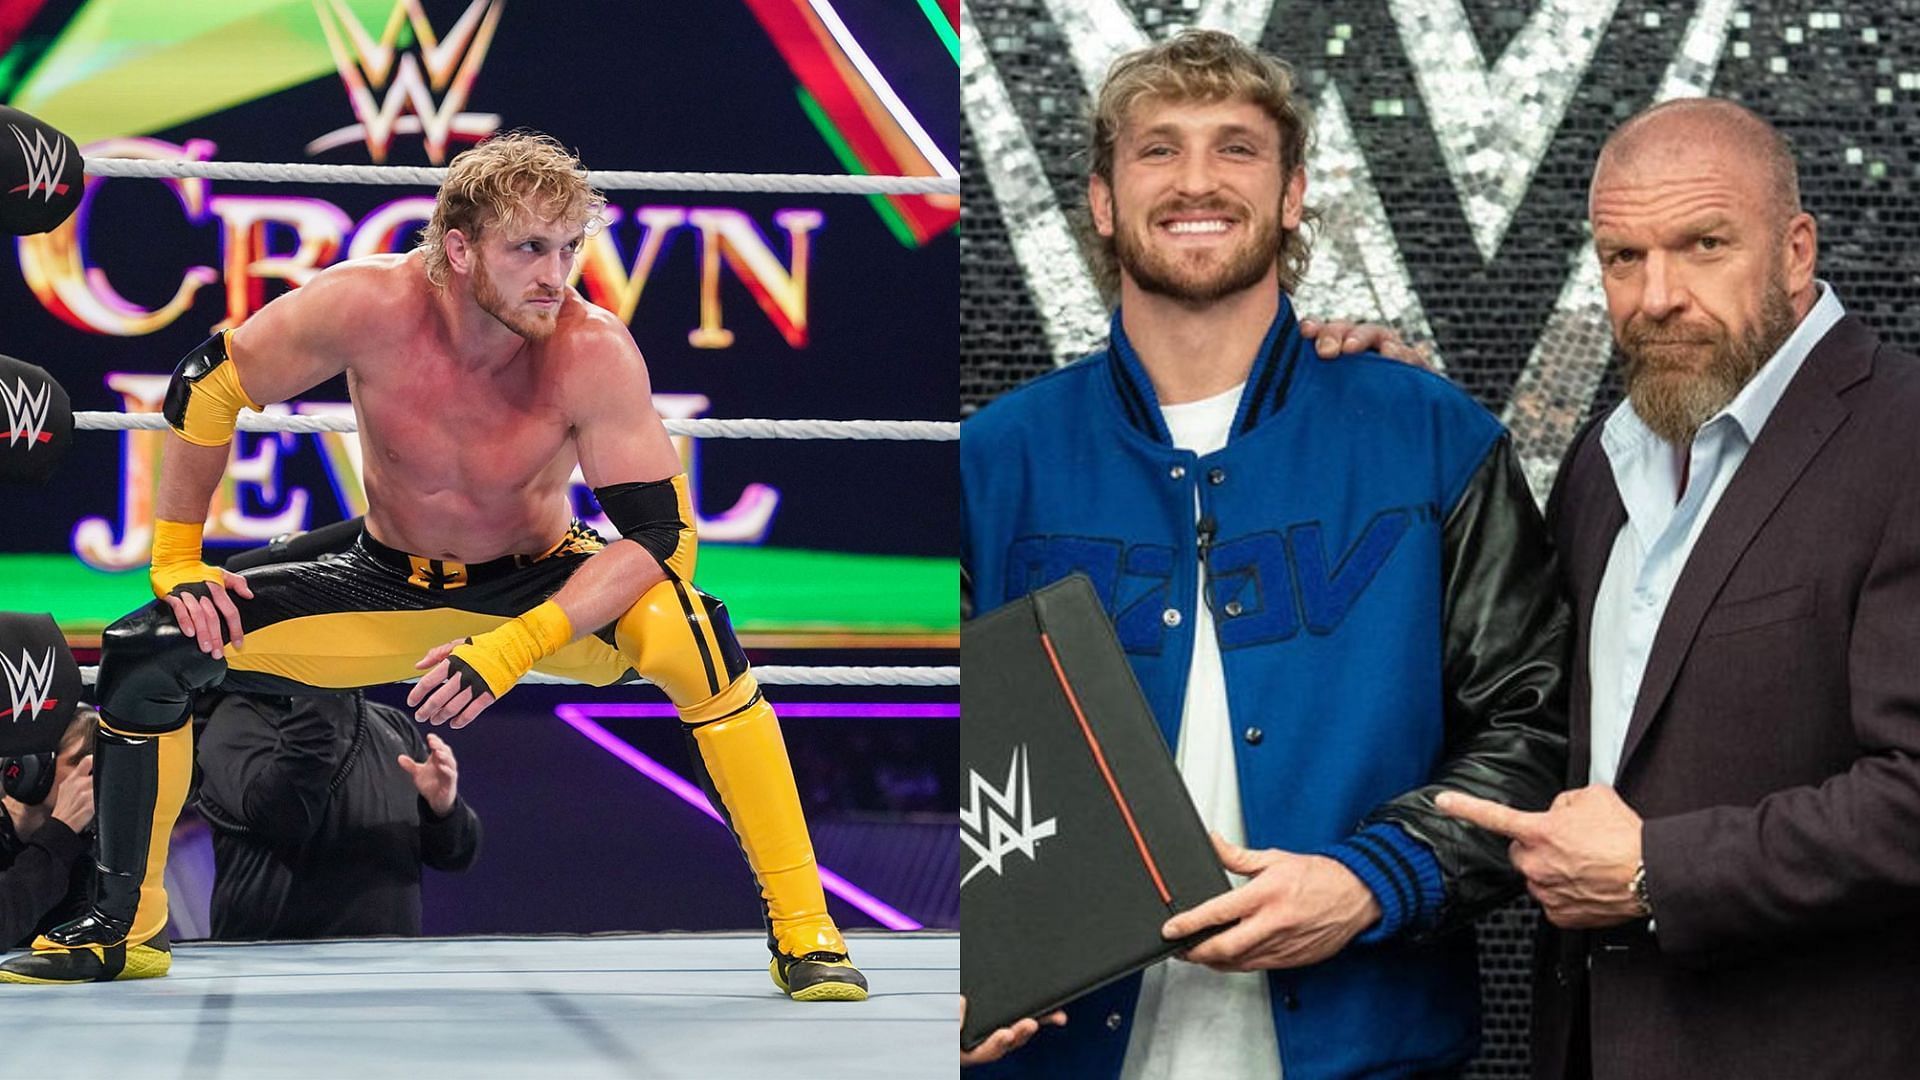 Logan Paul has extended his WWE contract